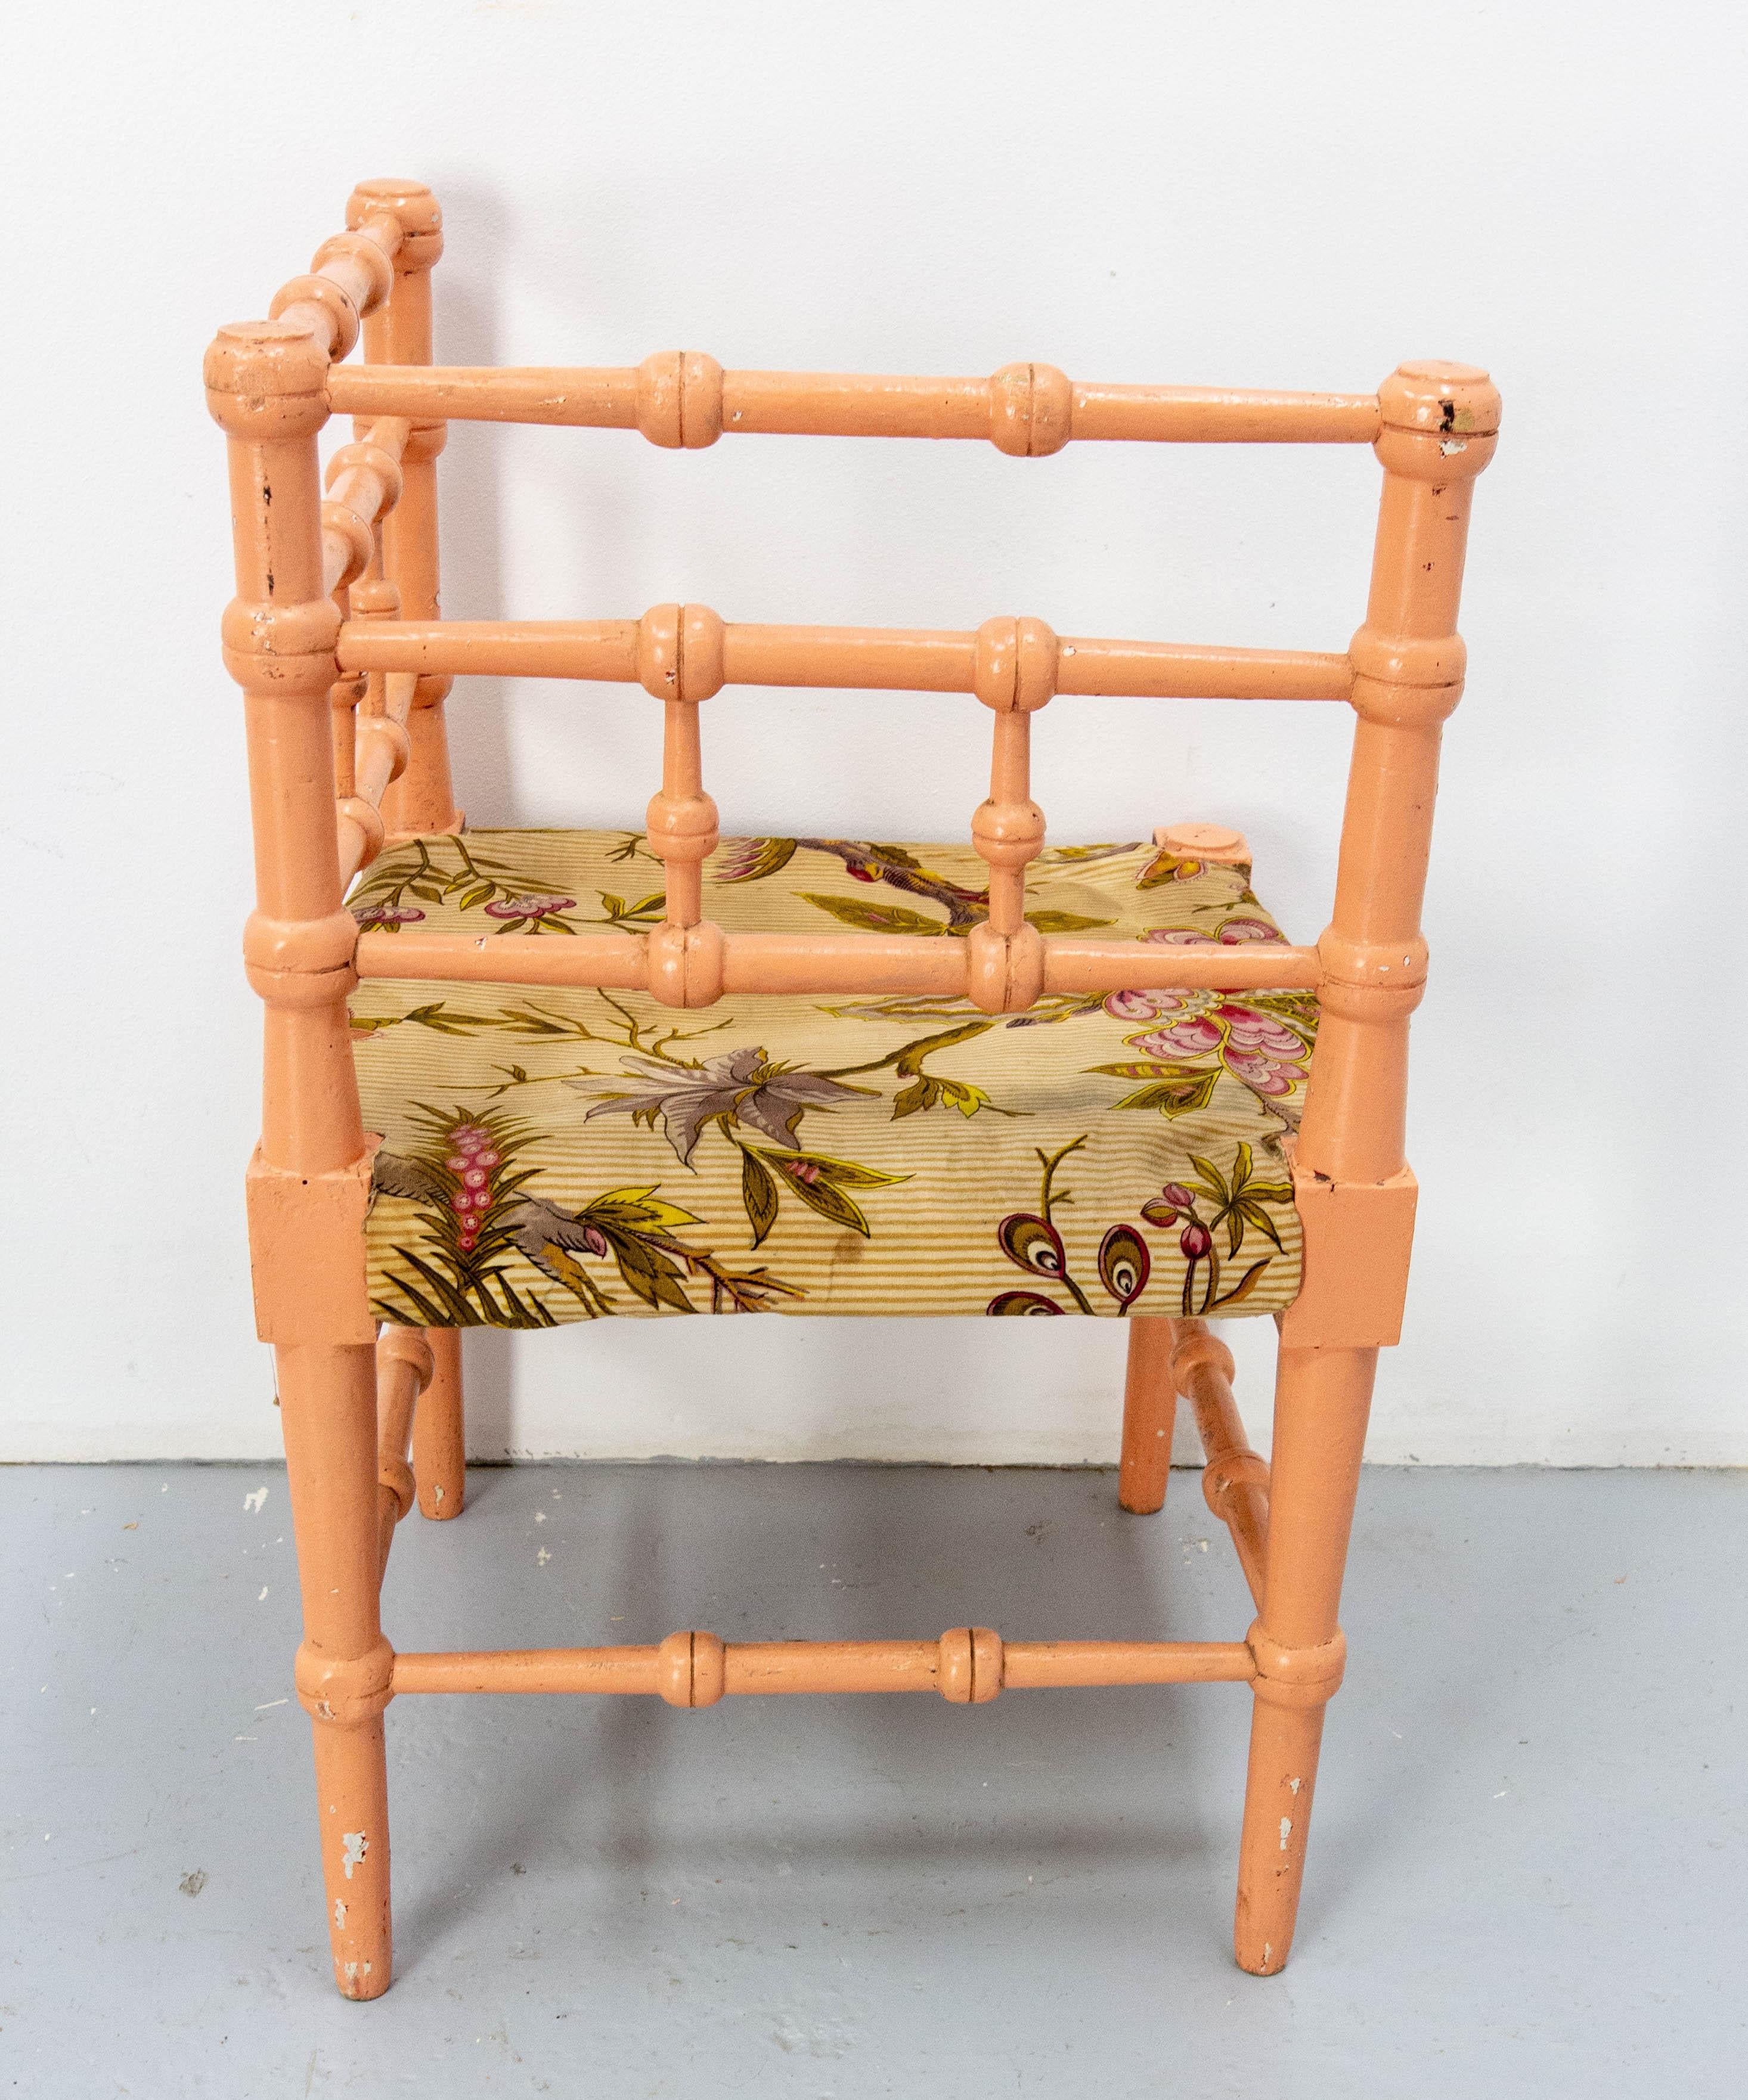 Turned Corner Chair for Child Painted Wood & Fabric French, 19th Century For Sale 2